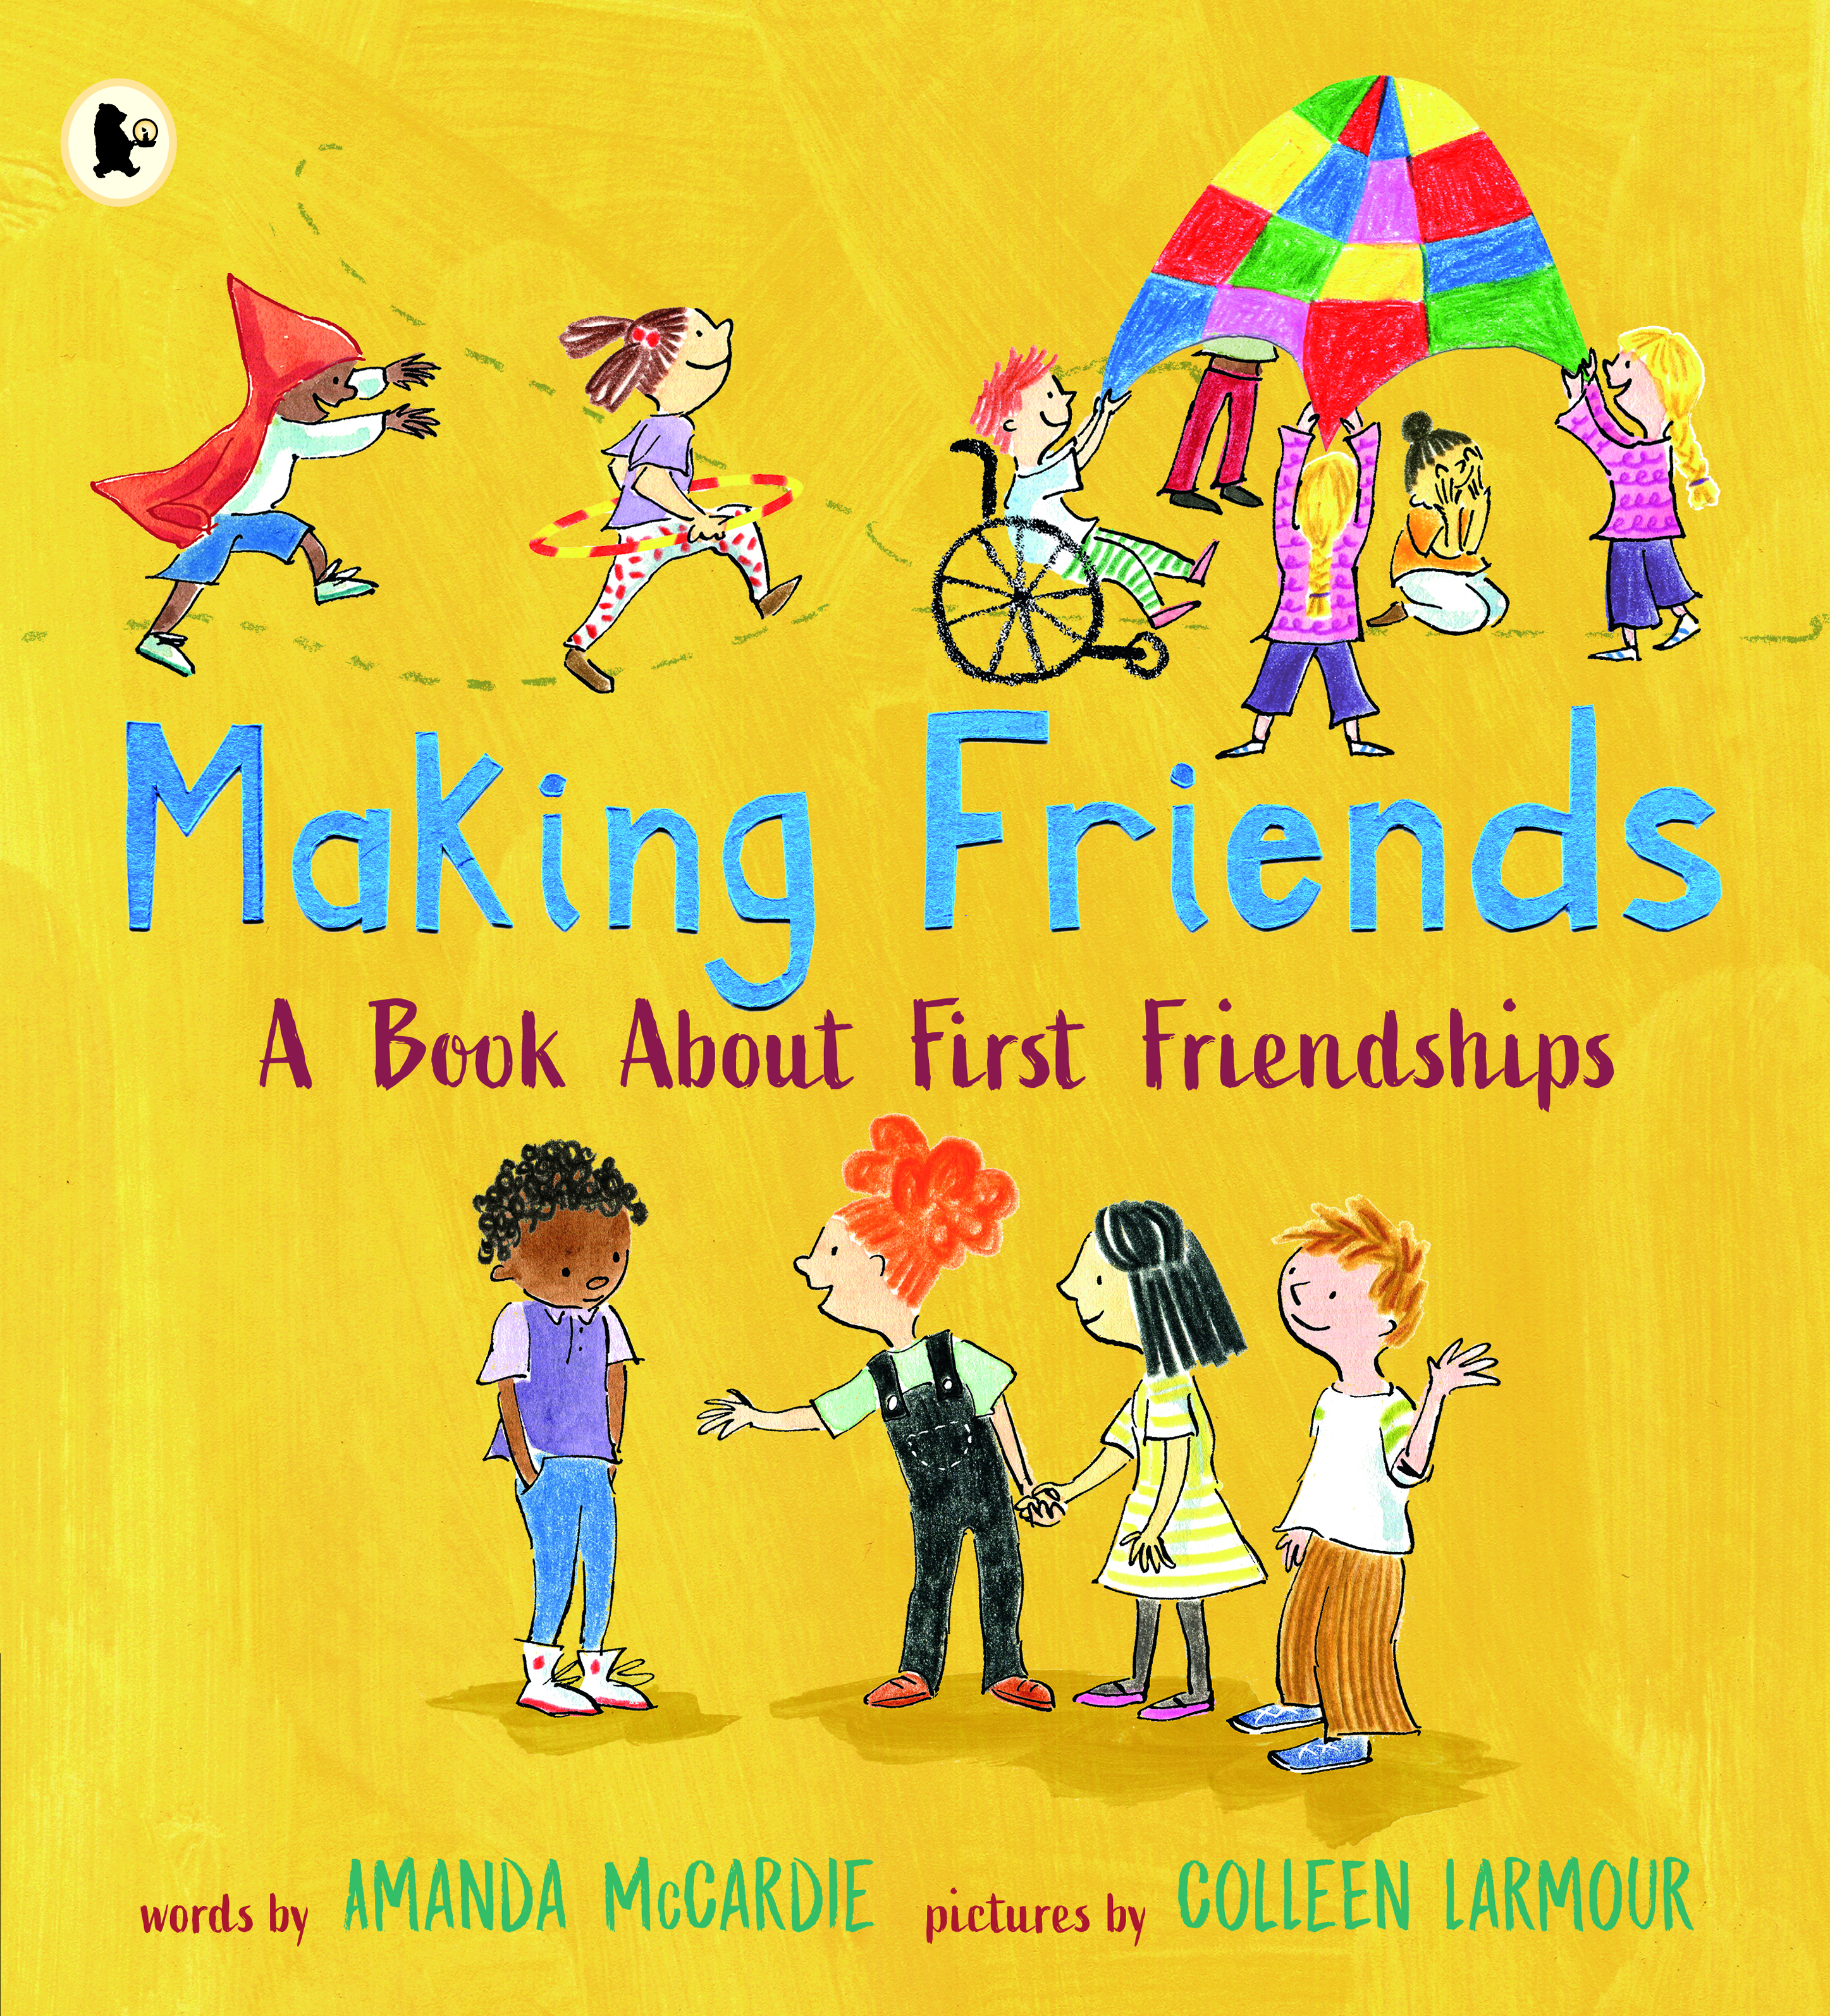 Making-Friends-A-Book-About-First-Friendships